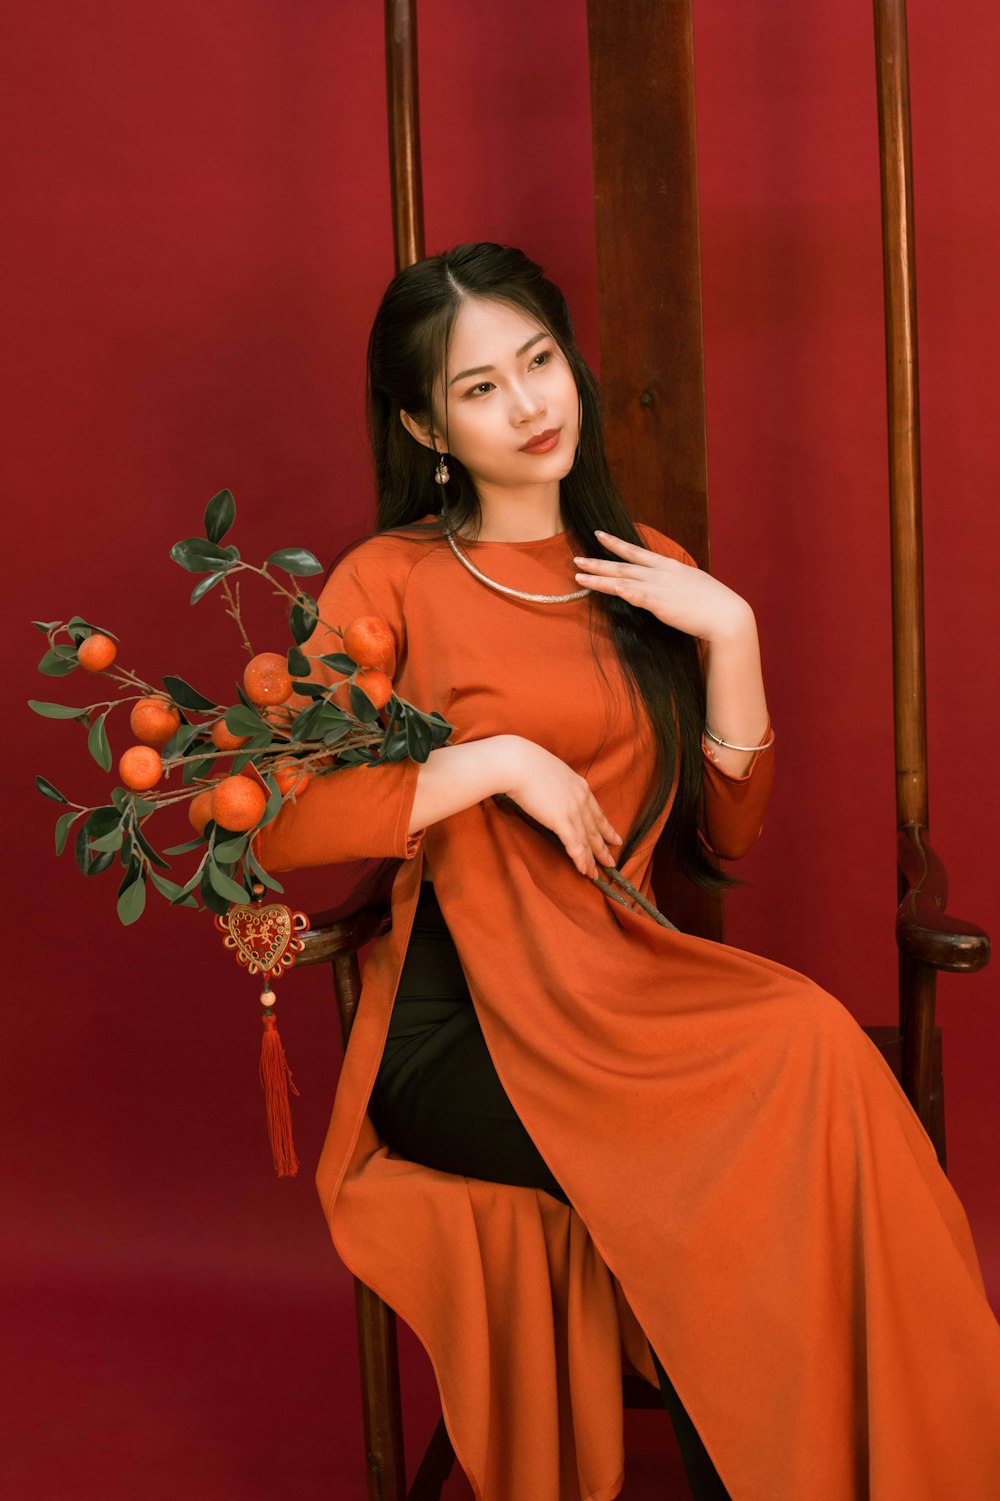 a woman sitting on a chair holding a bouquet of oranges